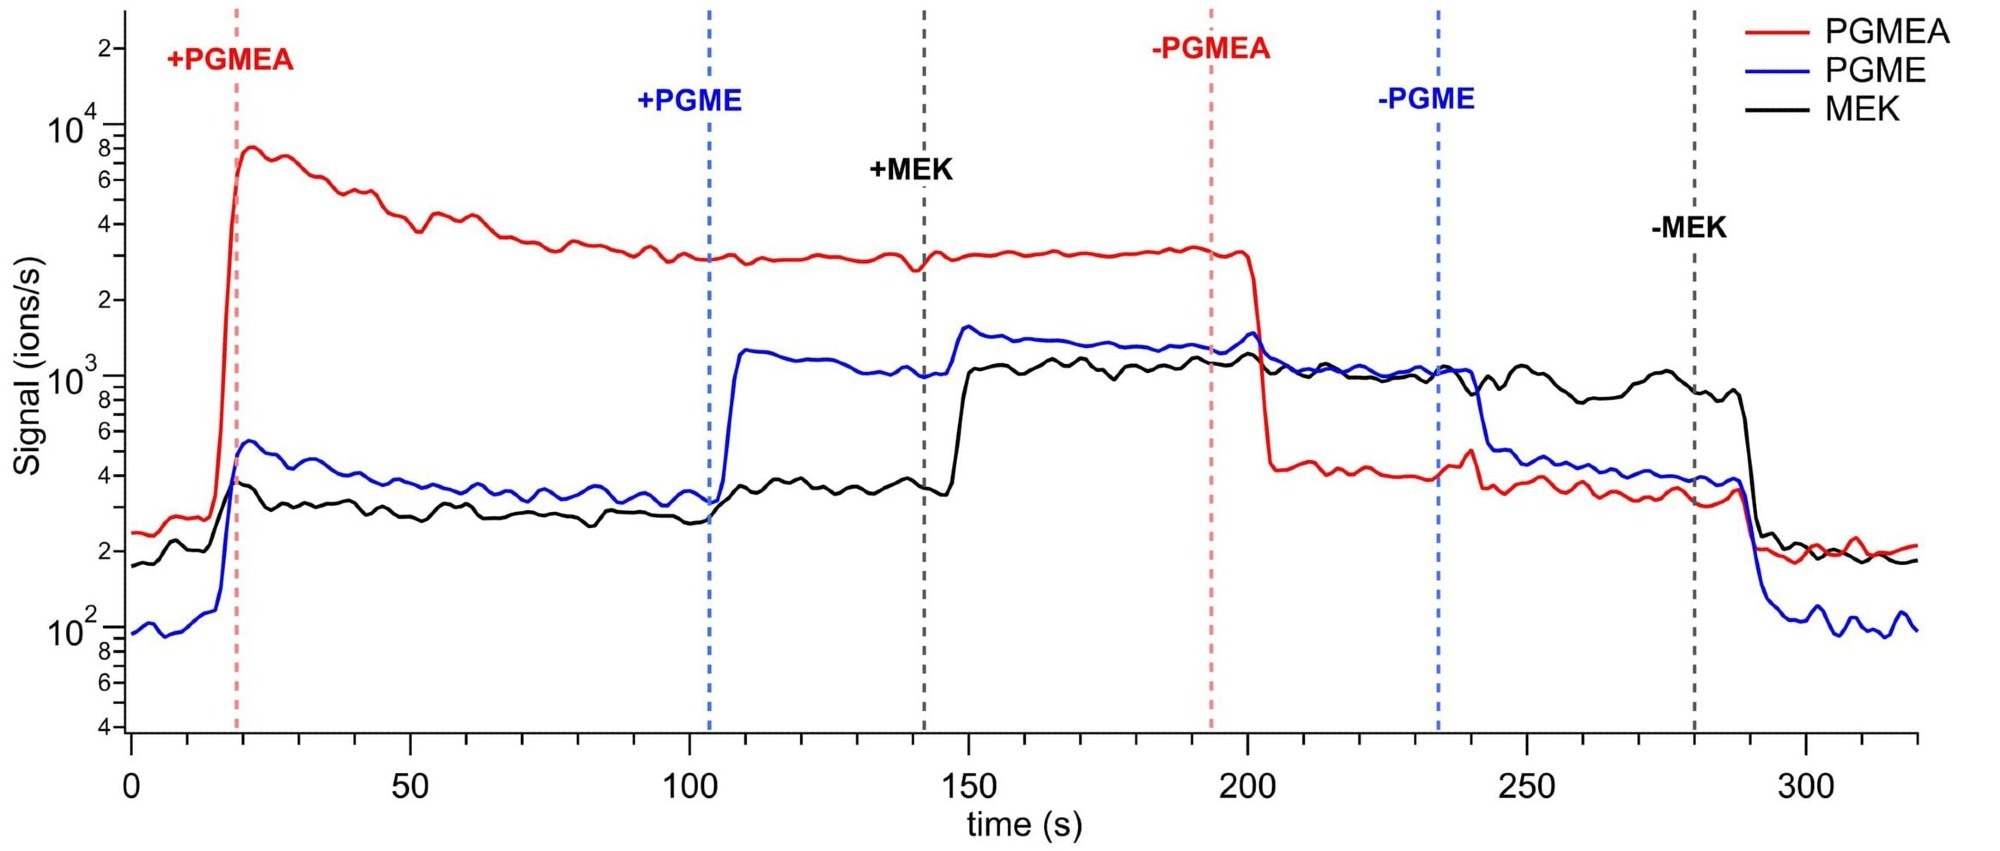 Sequential measurement and removal of PGMEA, PGME, and MEK demonstrating the detection of these challenging compounds without fragmentation.